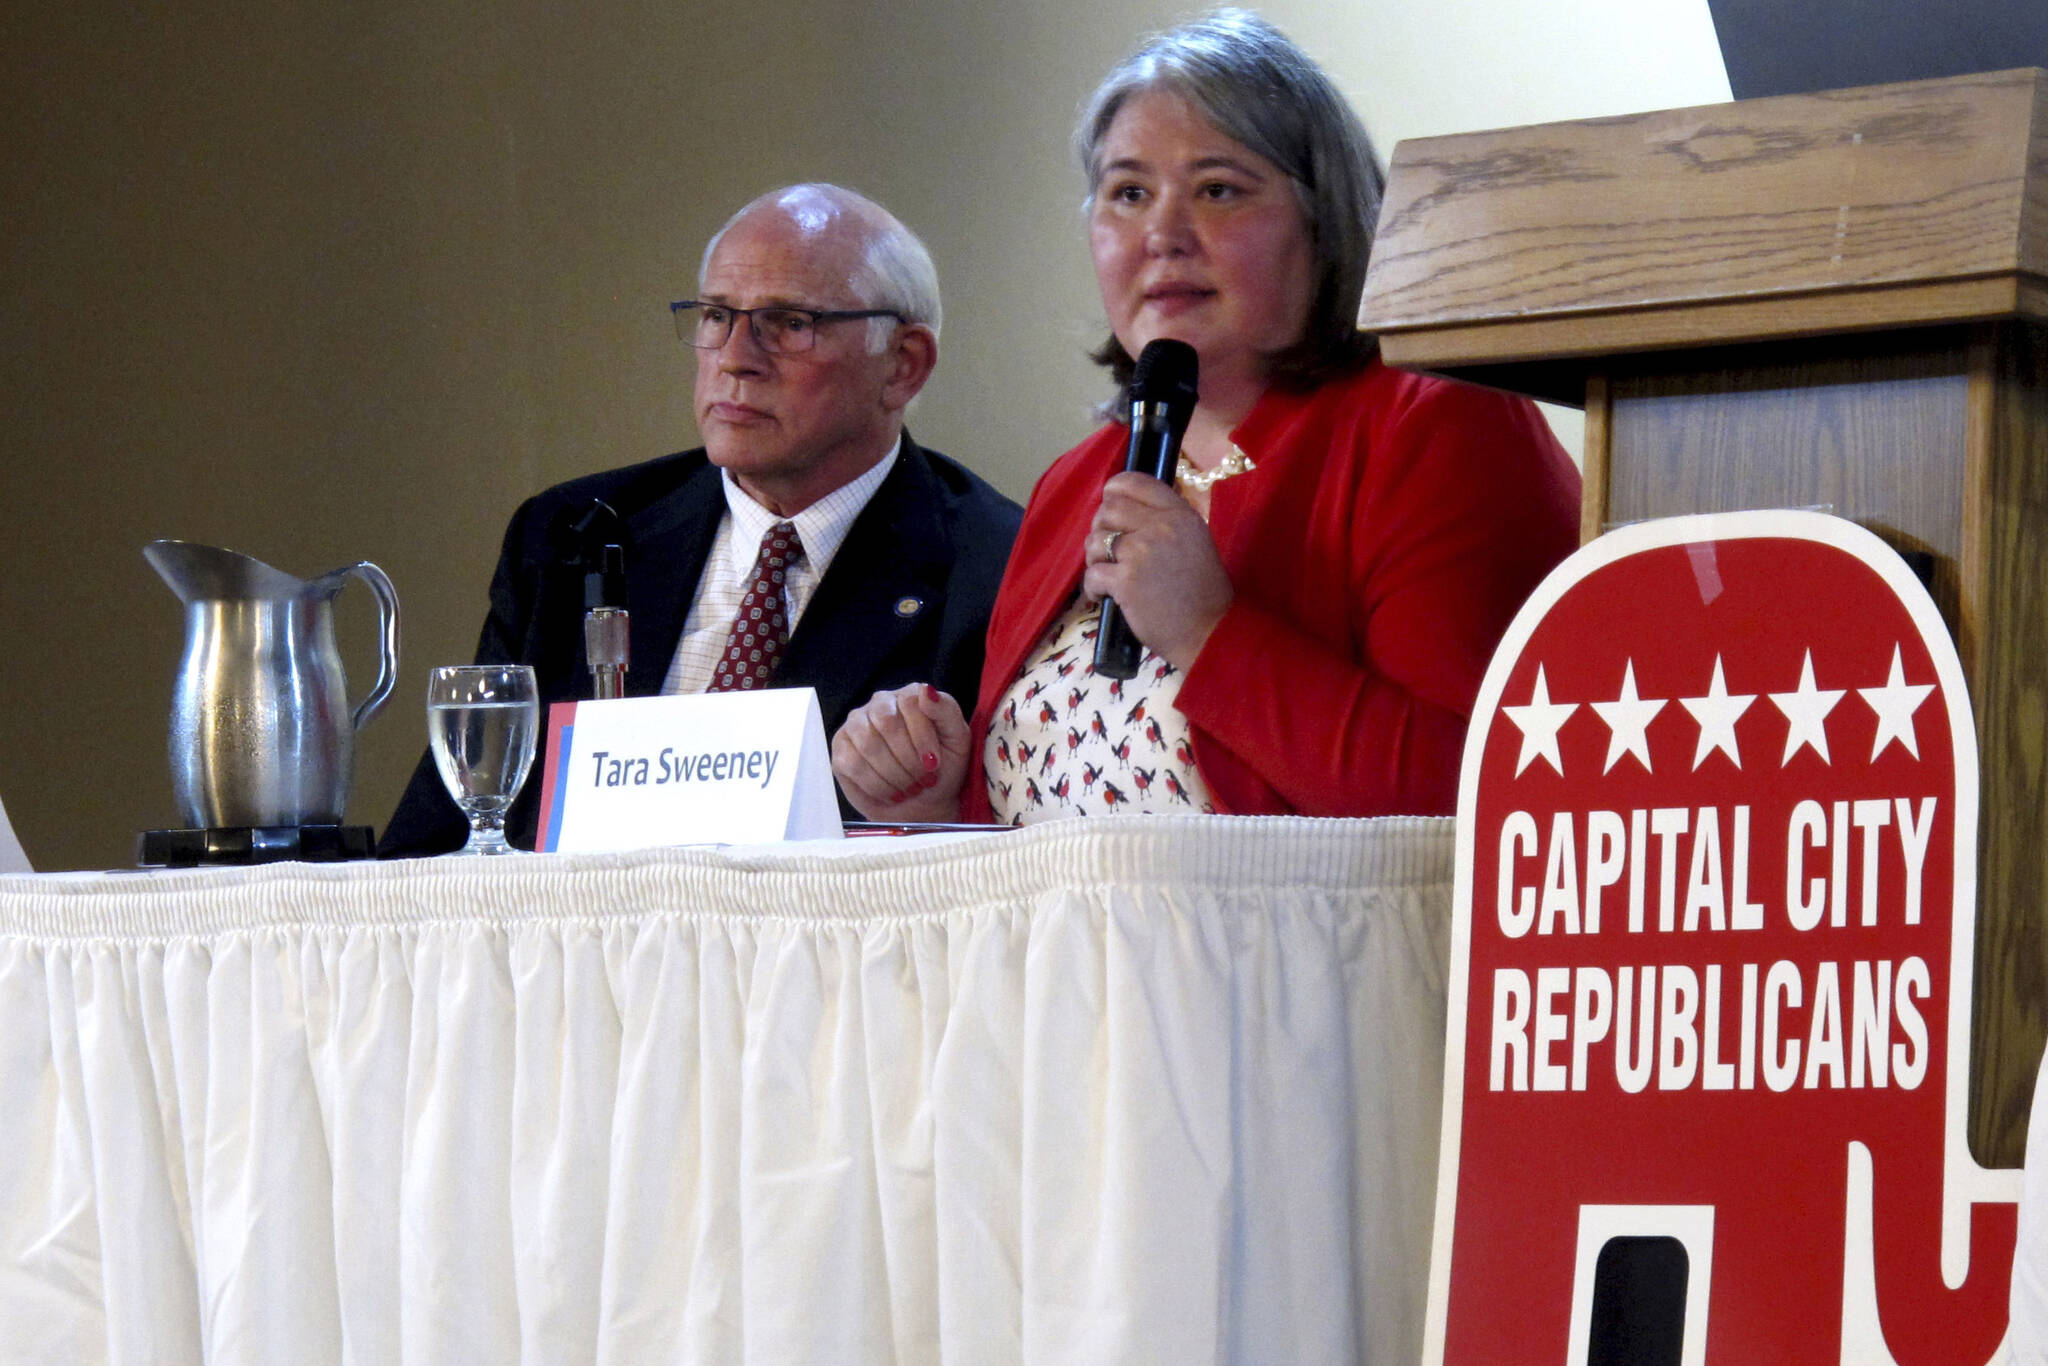 Republican Tara Sweeney, right, speaks Monday, May 16, 2022, at a forum in Juneau, Alaska, that was also attended by three other Republican candidates for Alaska’s U.S. House seat, including John Coghill, left. Sweeney and Coghill are among 48 candidates in a June 11 special primary for the House seat left vacant by the death earlier this year of Republican Rep. Don Young. (AP Photo/Becky Bohrer)